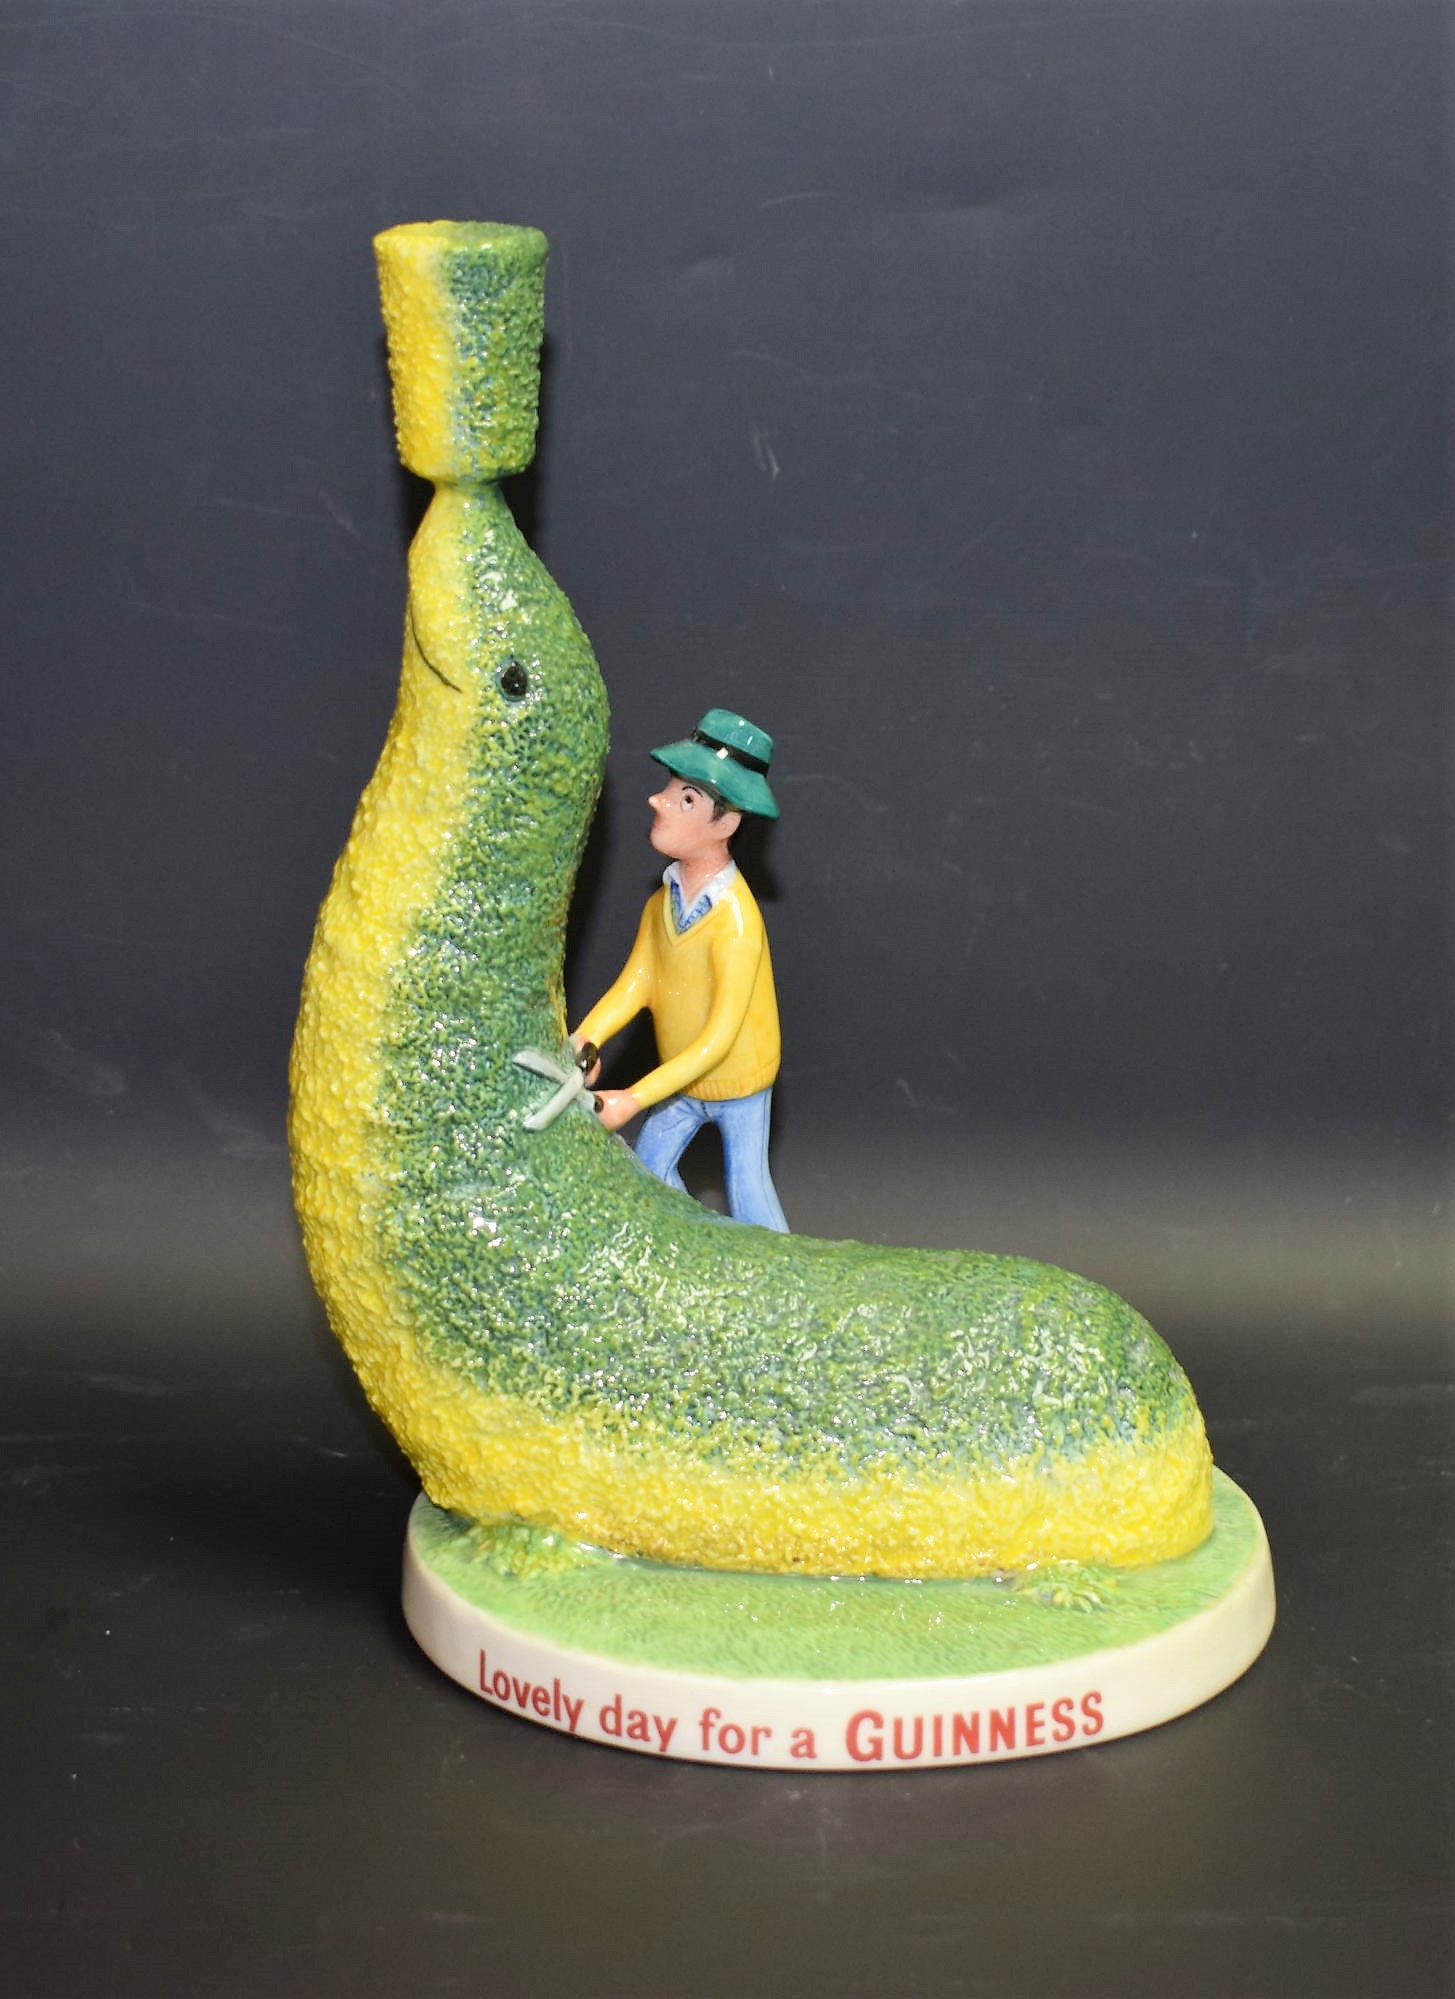 A Royal Doulton ceramic advertising figure, Guinness Topiary Sealion, MCL28,